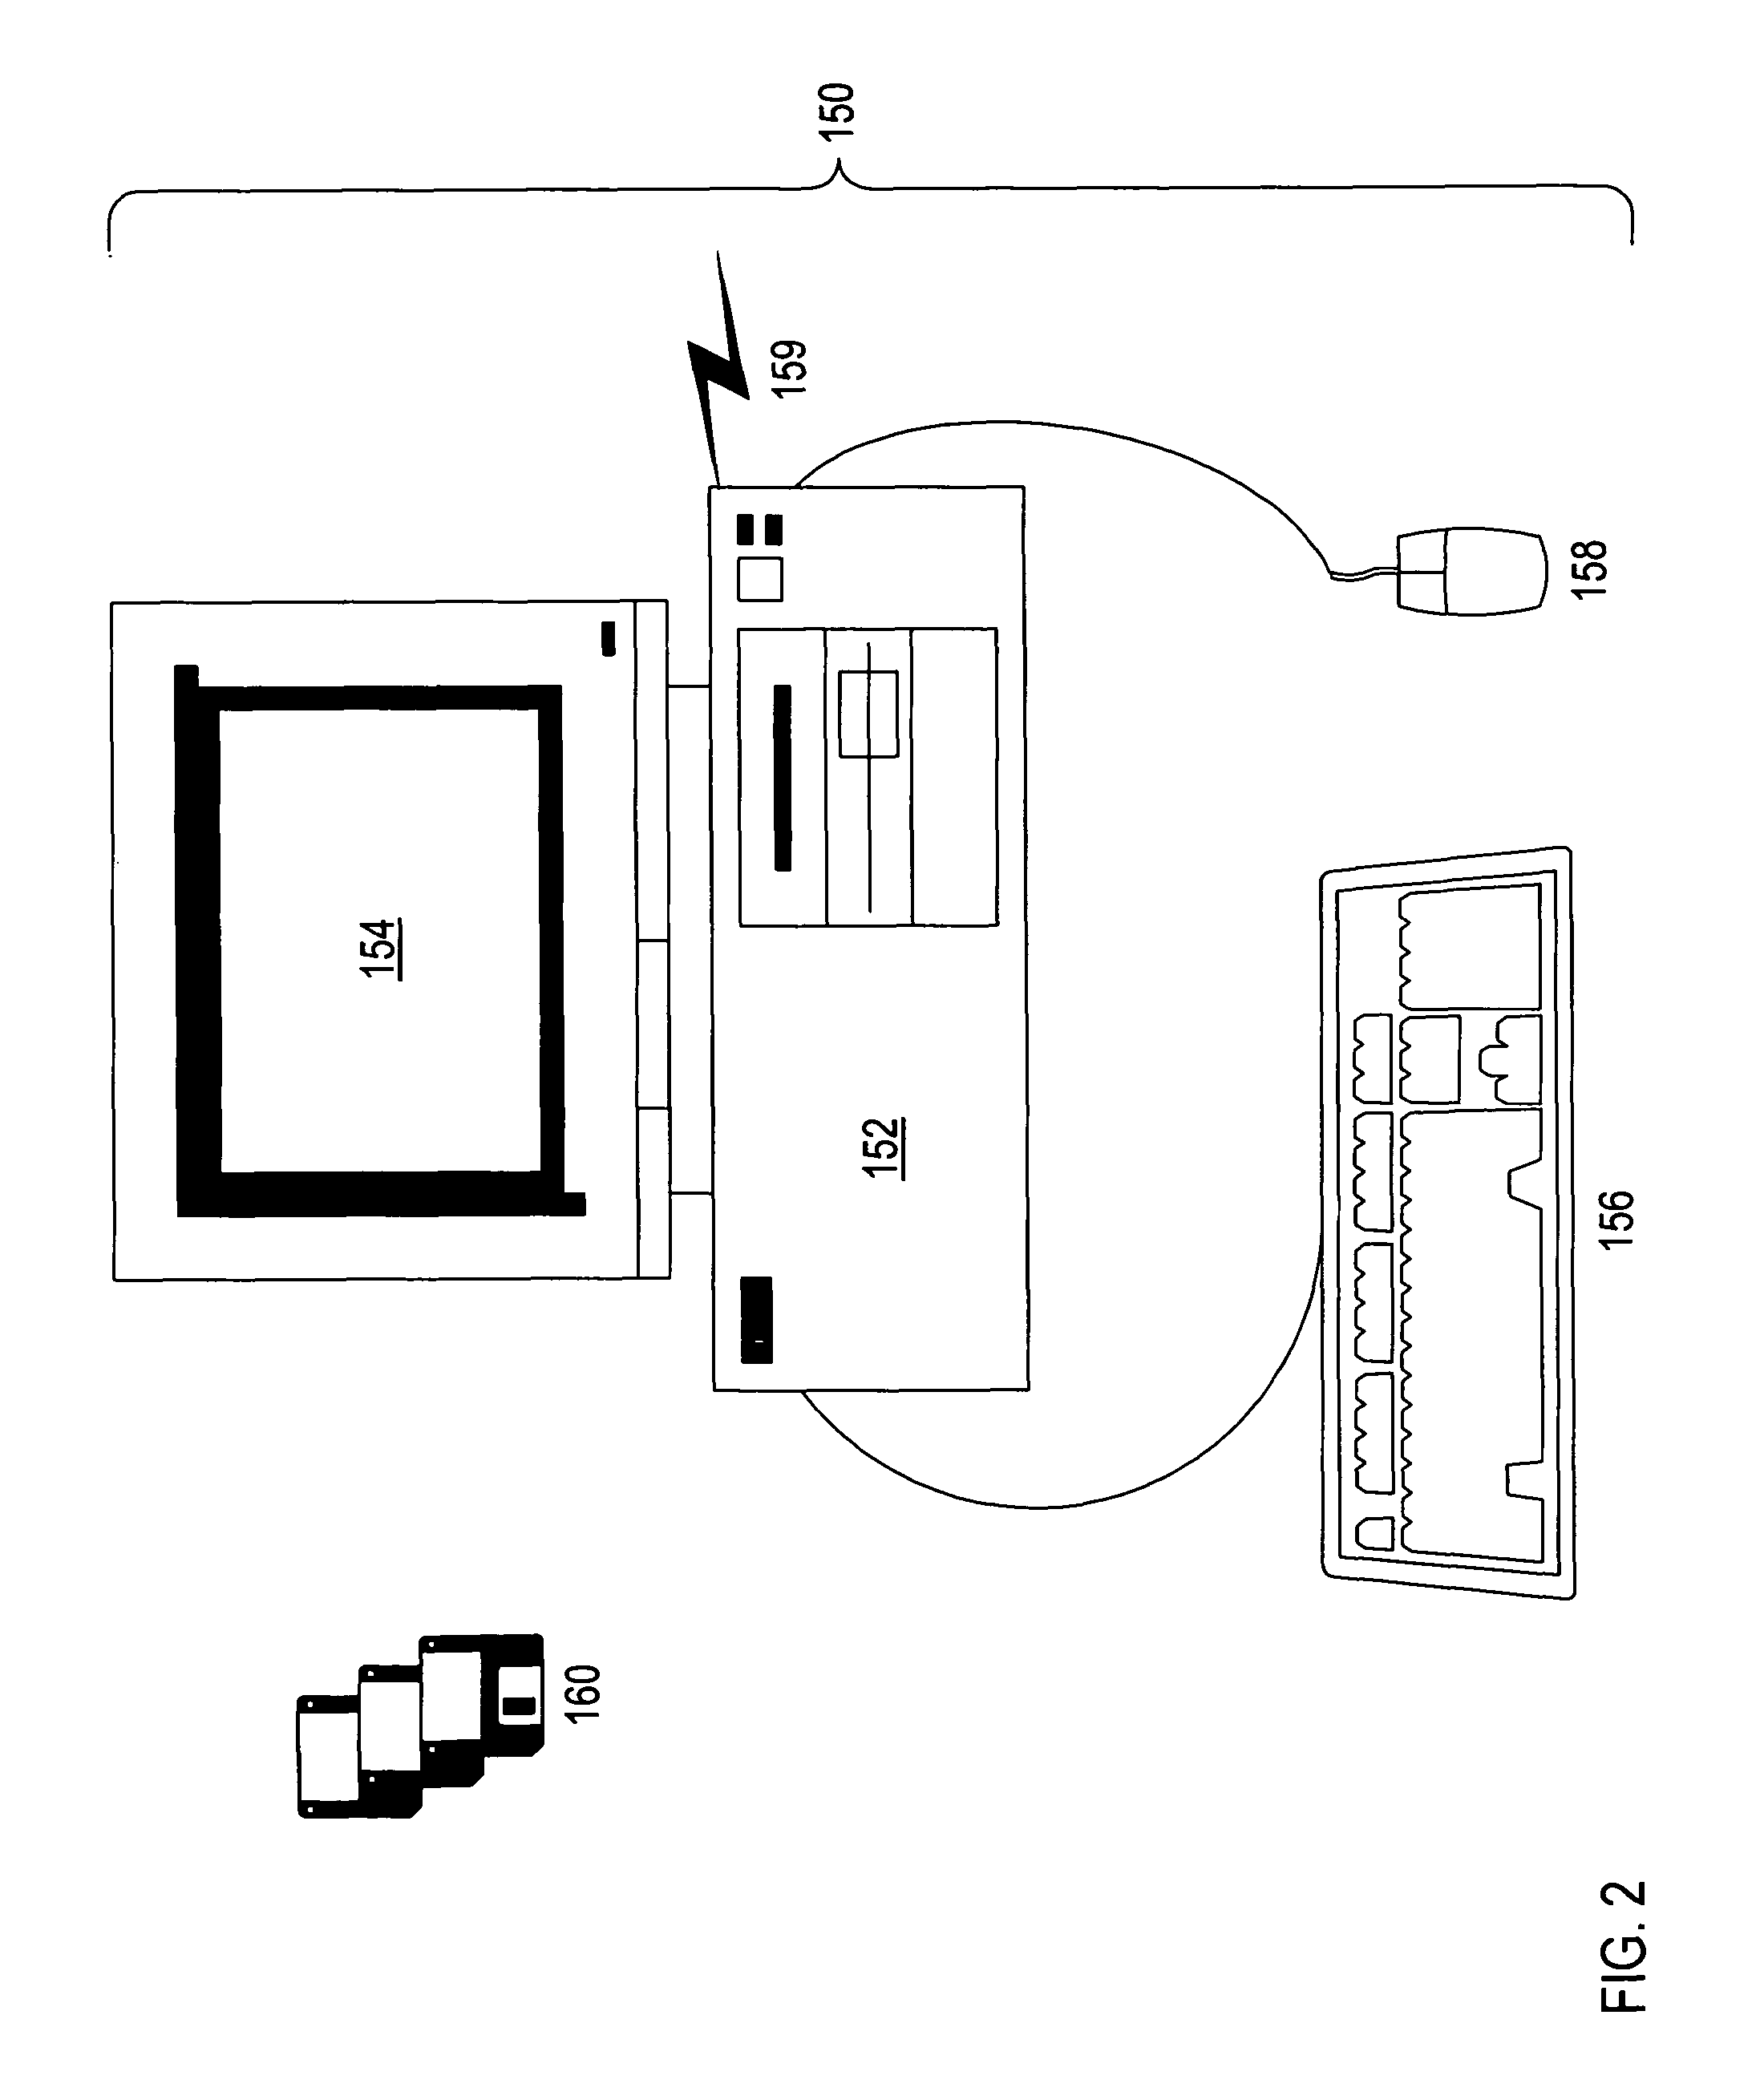 System and method for identifying individual users accessing a web site